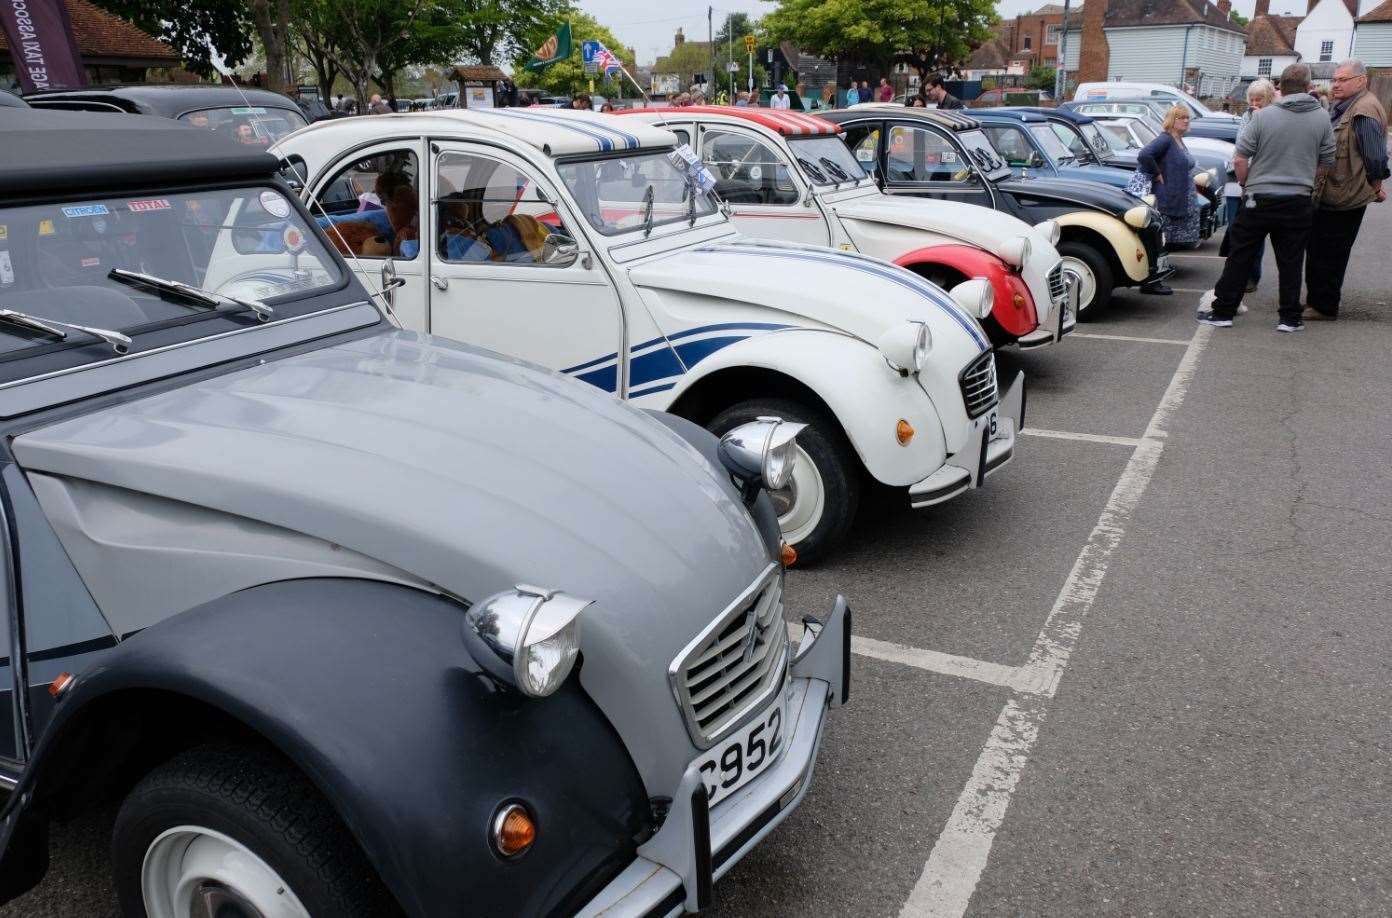 Vintage vehicles will take over the town of Faversham. Picture: James Adley